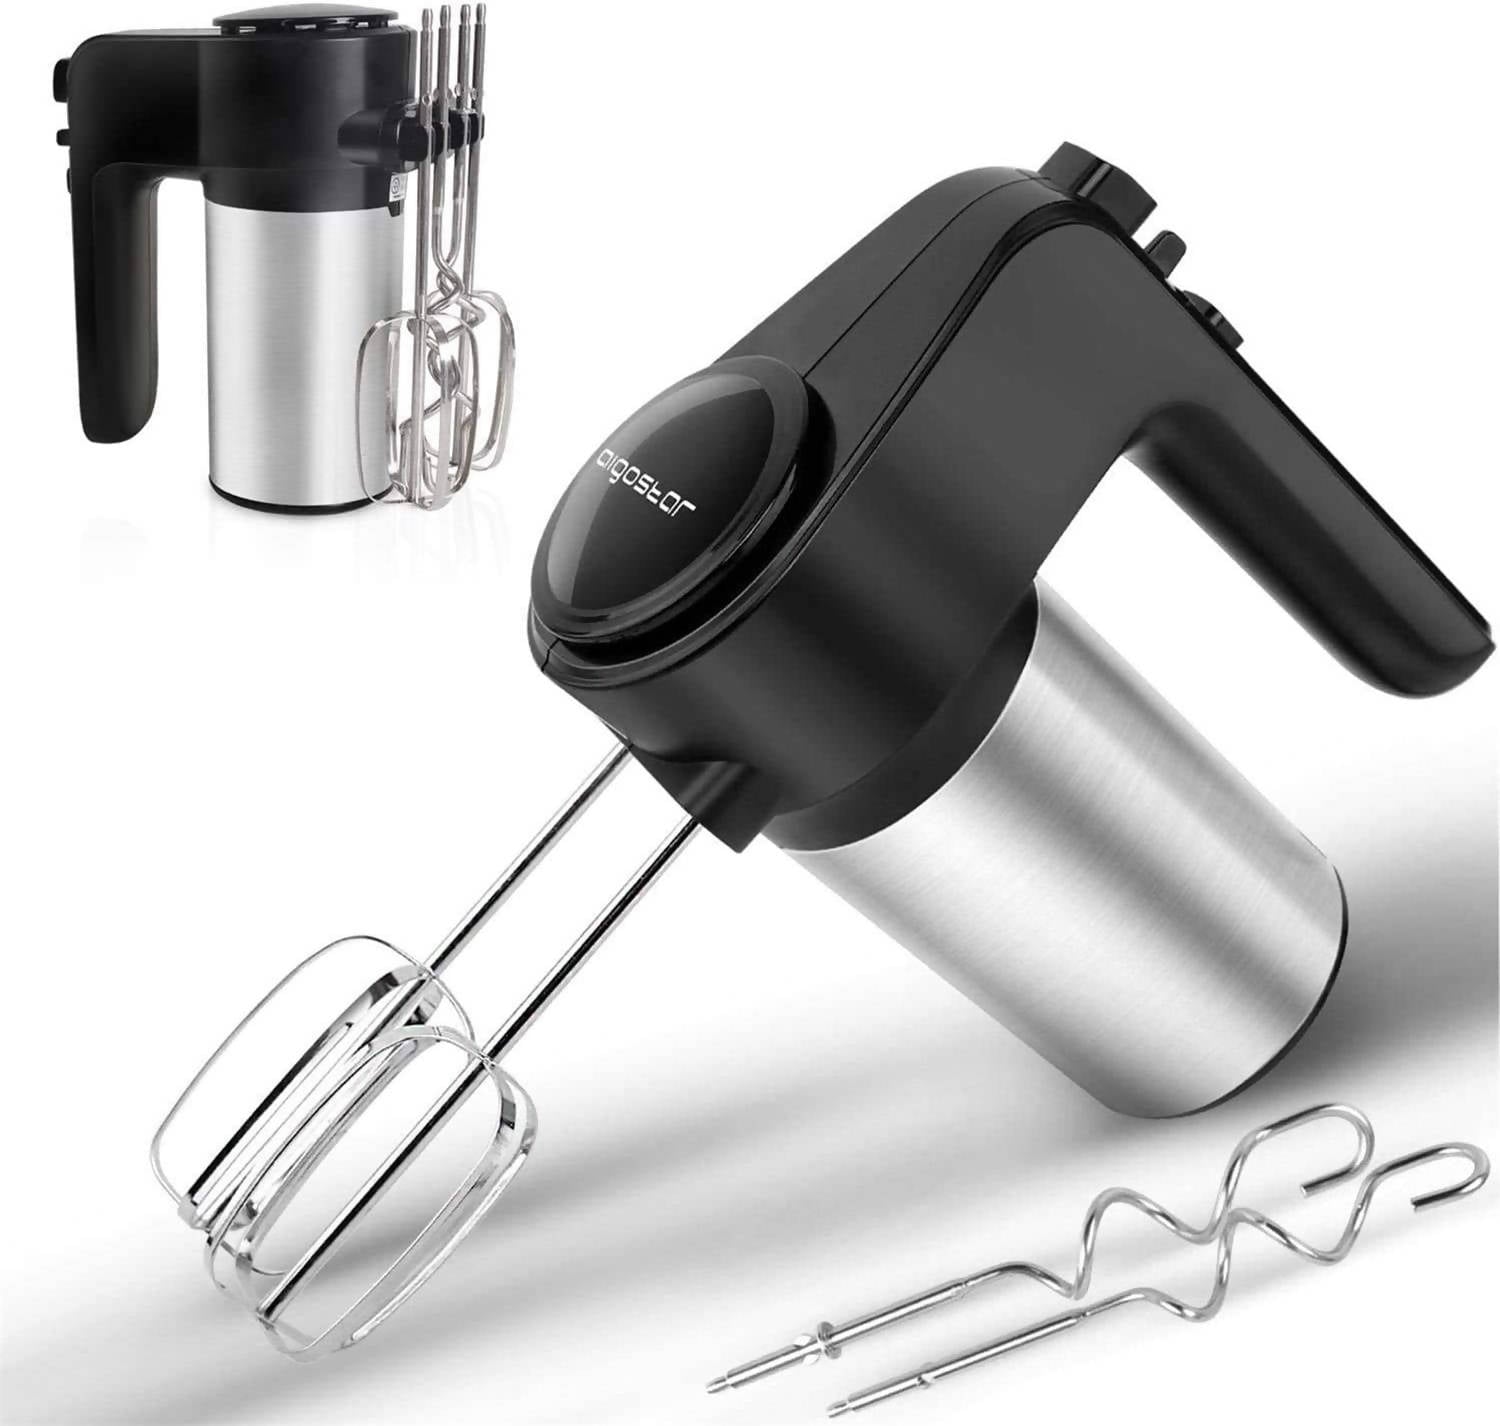 Mixer Hand Stirrer Stainless Steel Electric Stand BPA-Free for Cake Cocktail 300 Watt 6 Speed Settings with Accessory Holder